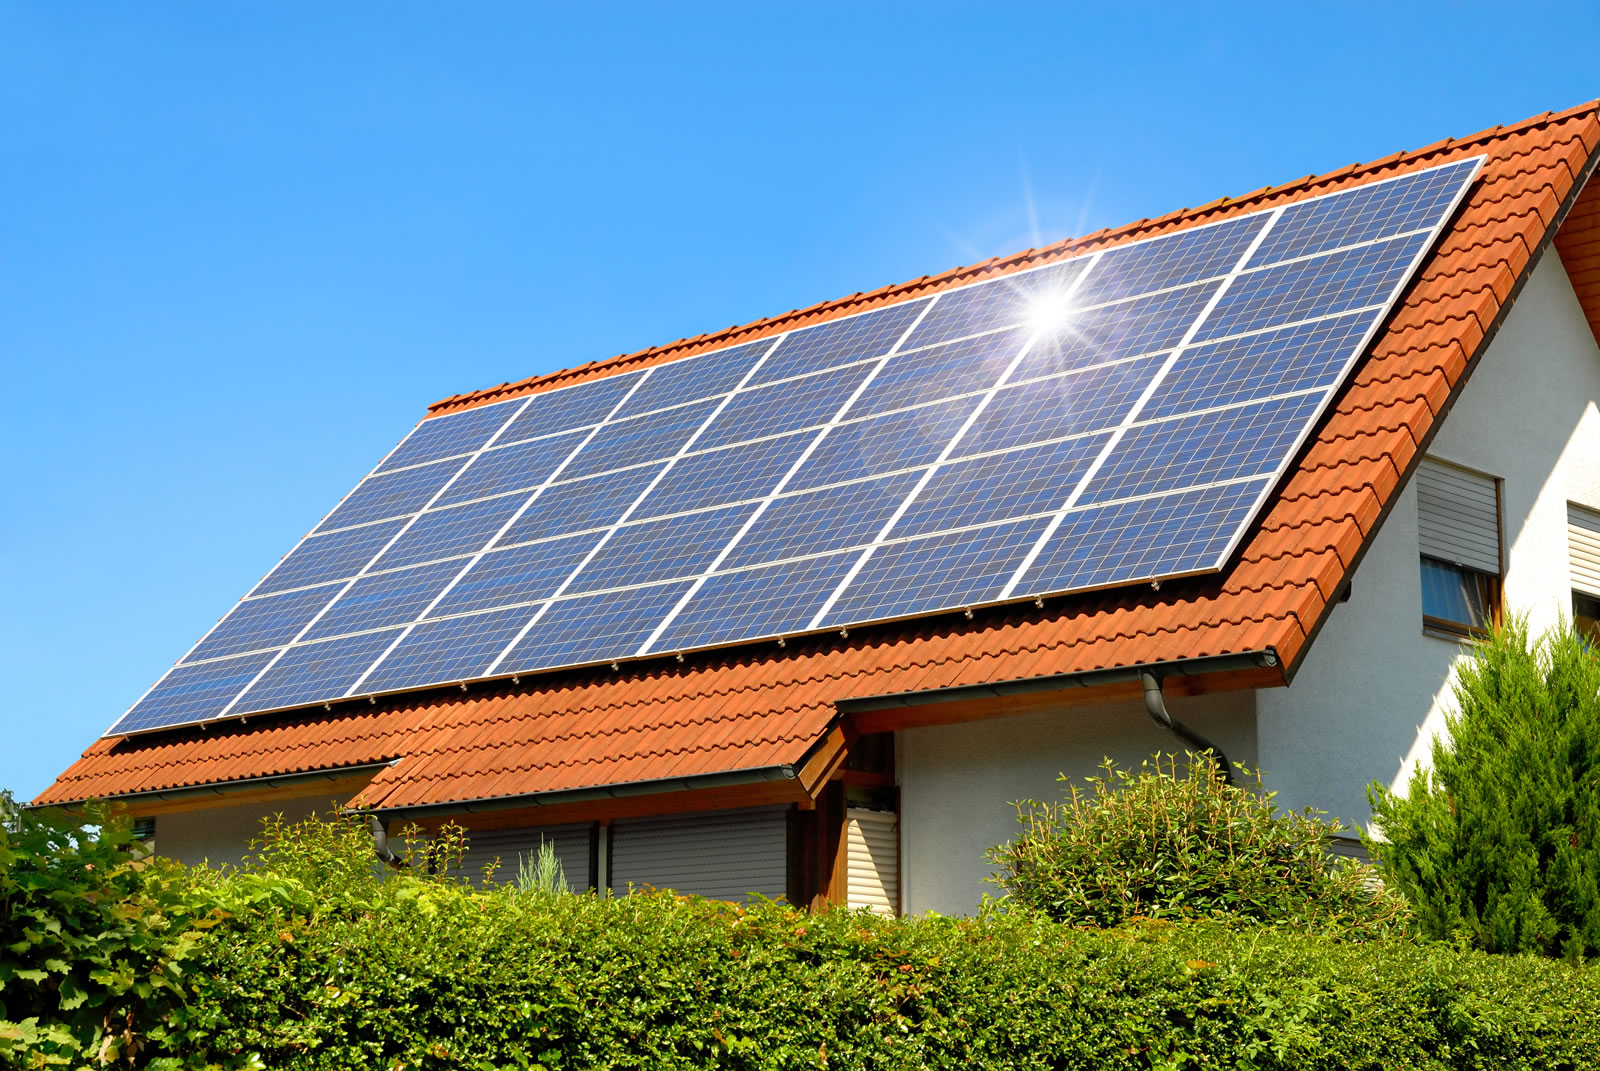 Solar panels on the roof of detached house generating renewable energy